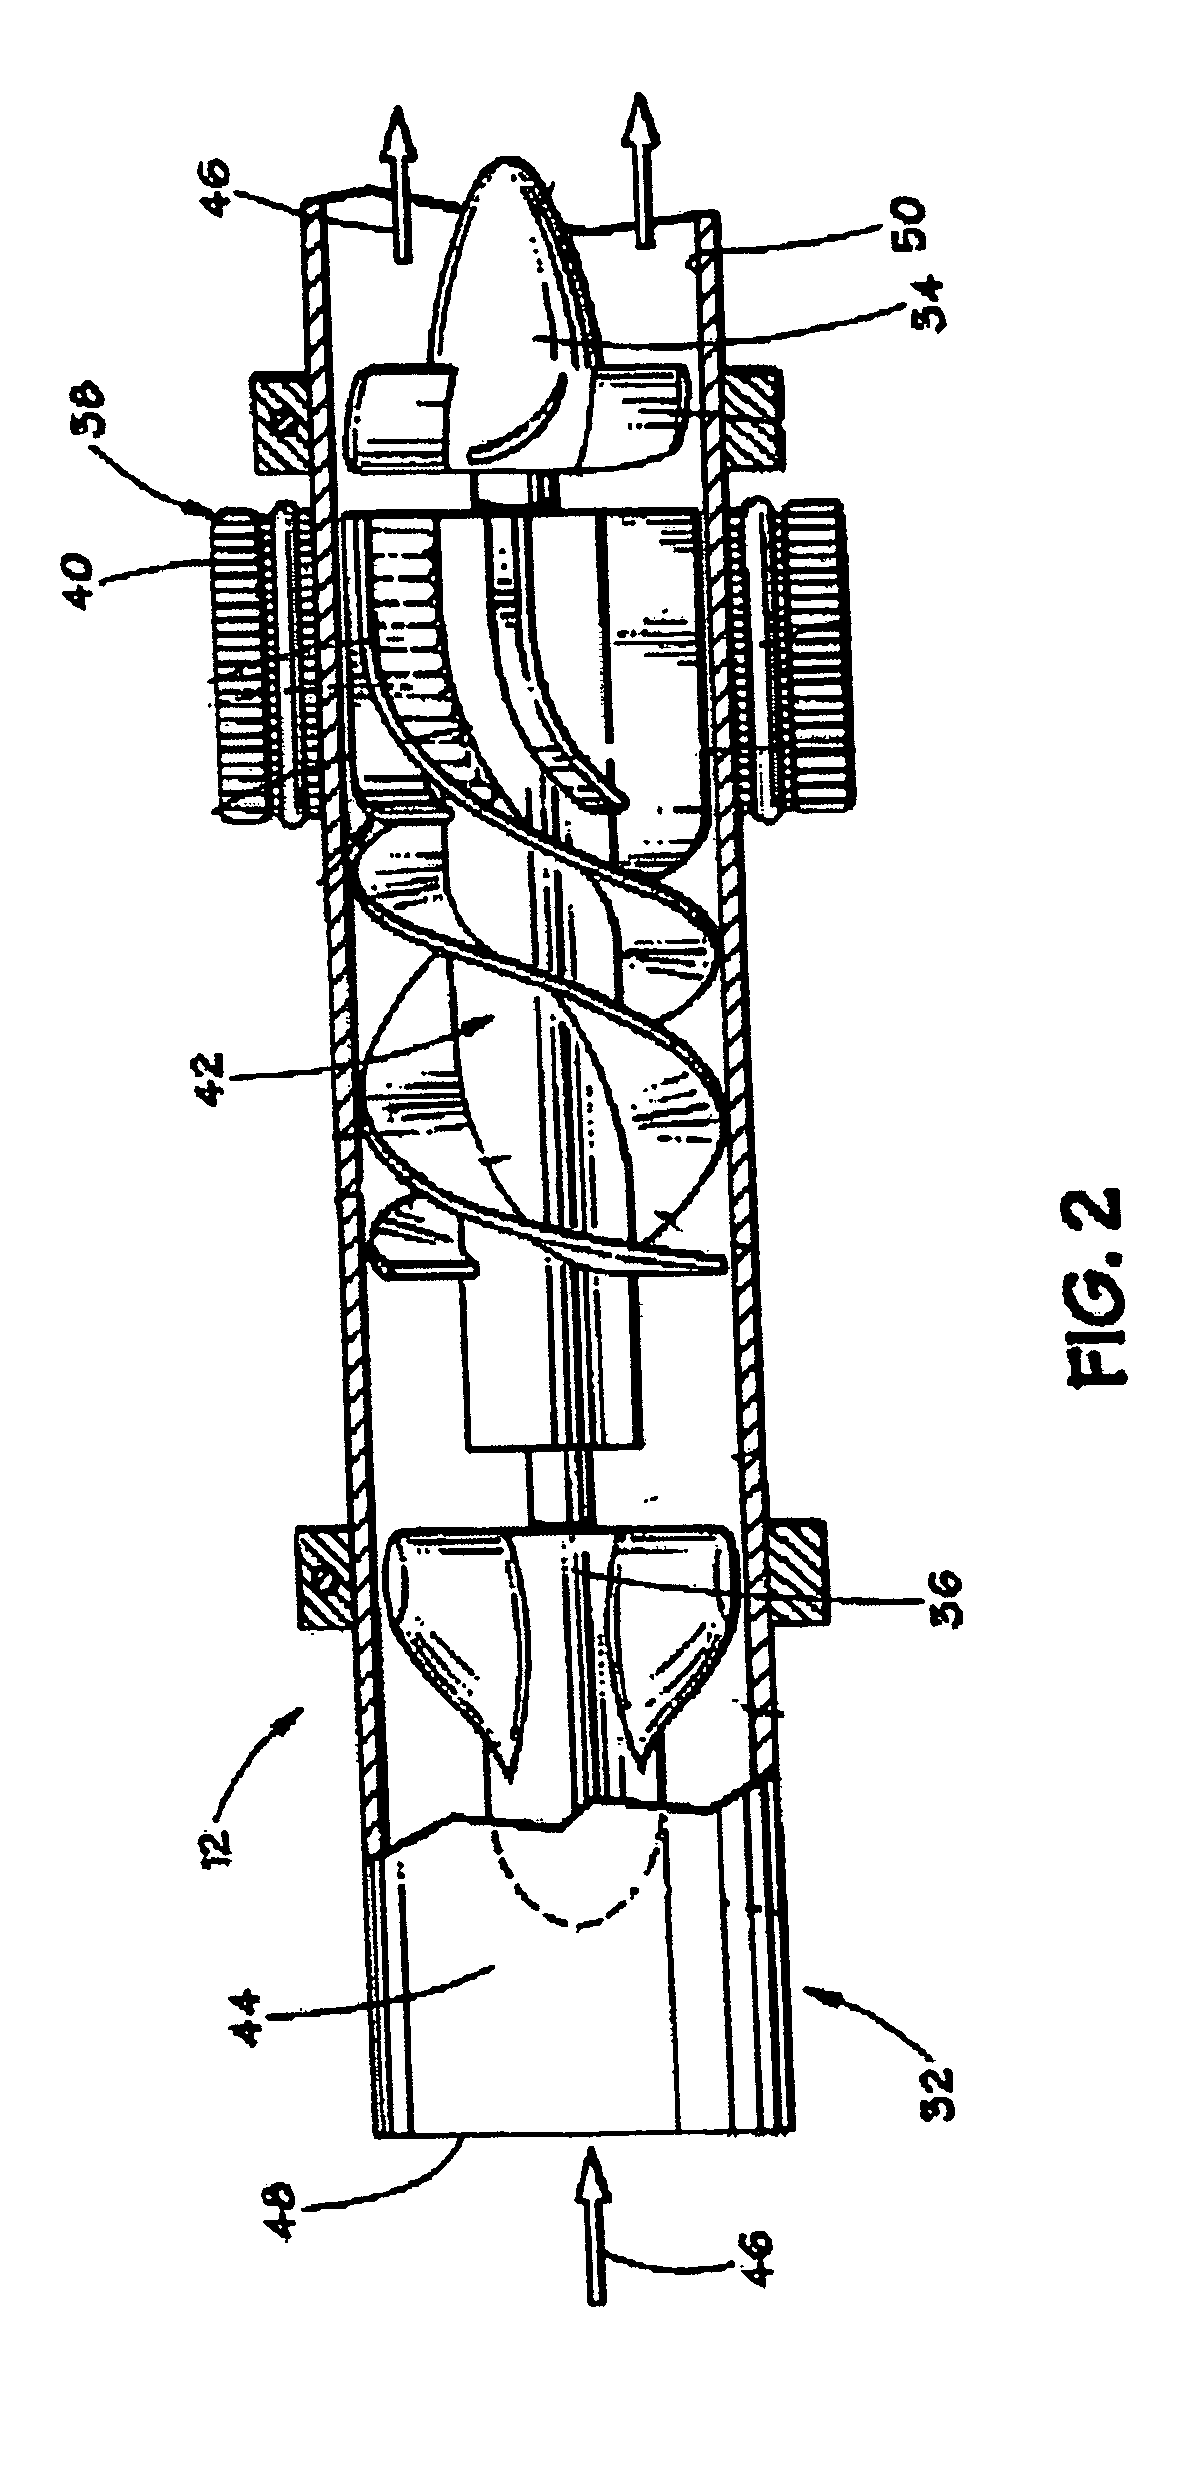 Method and system for physiologic control of a blood pump